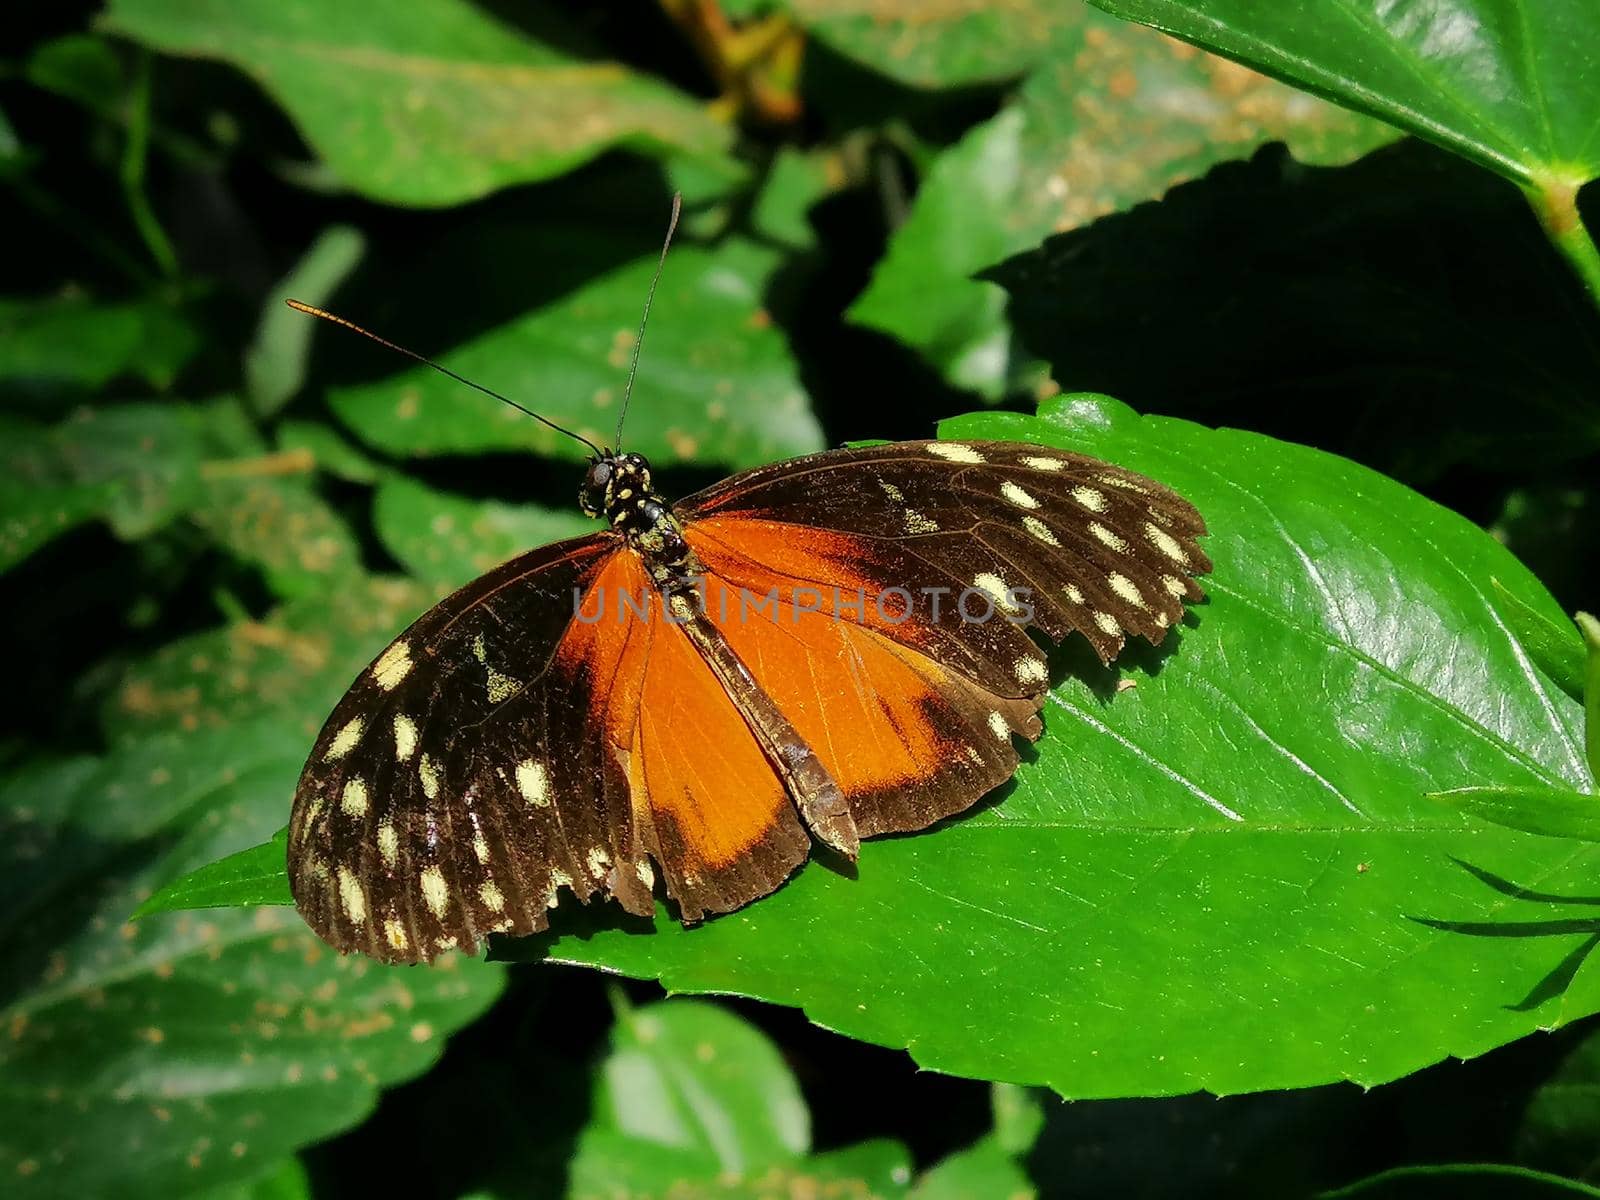 Closeup of the side of an orange golden longwing butterfly perched on a green leaf